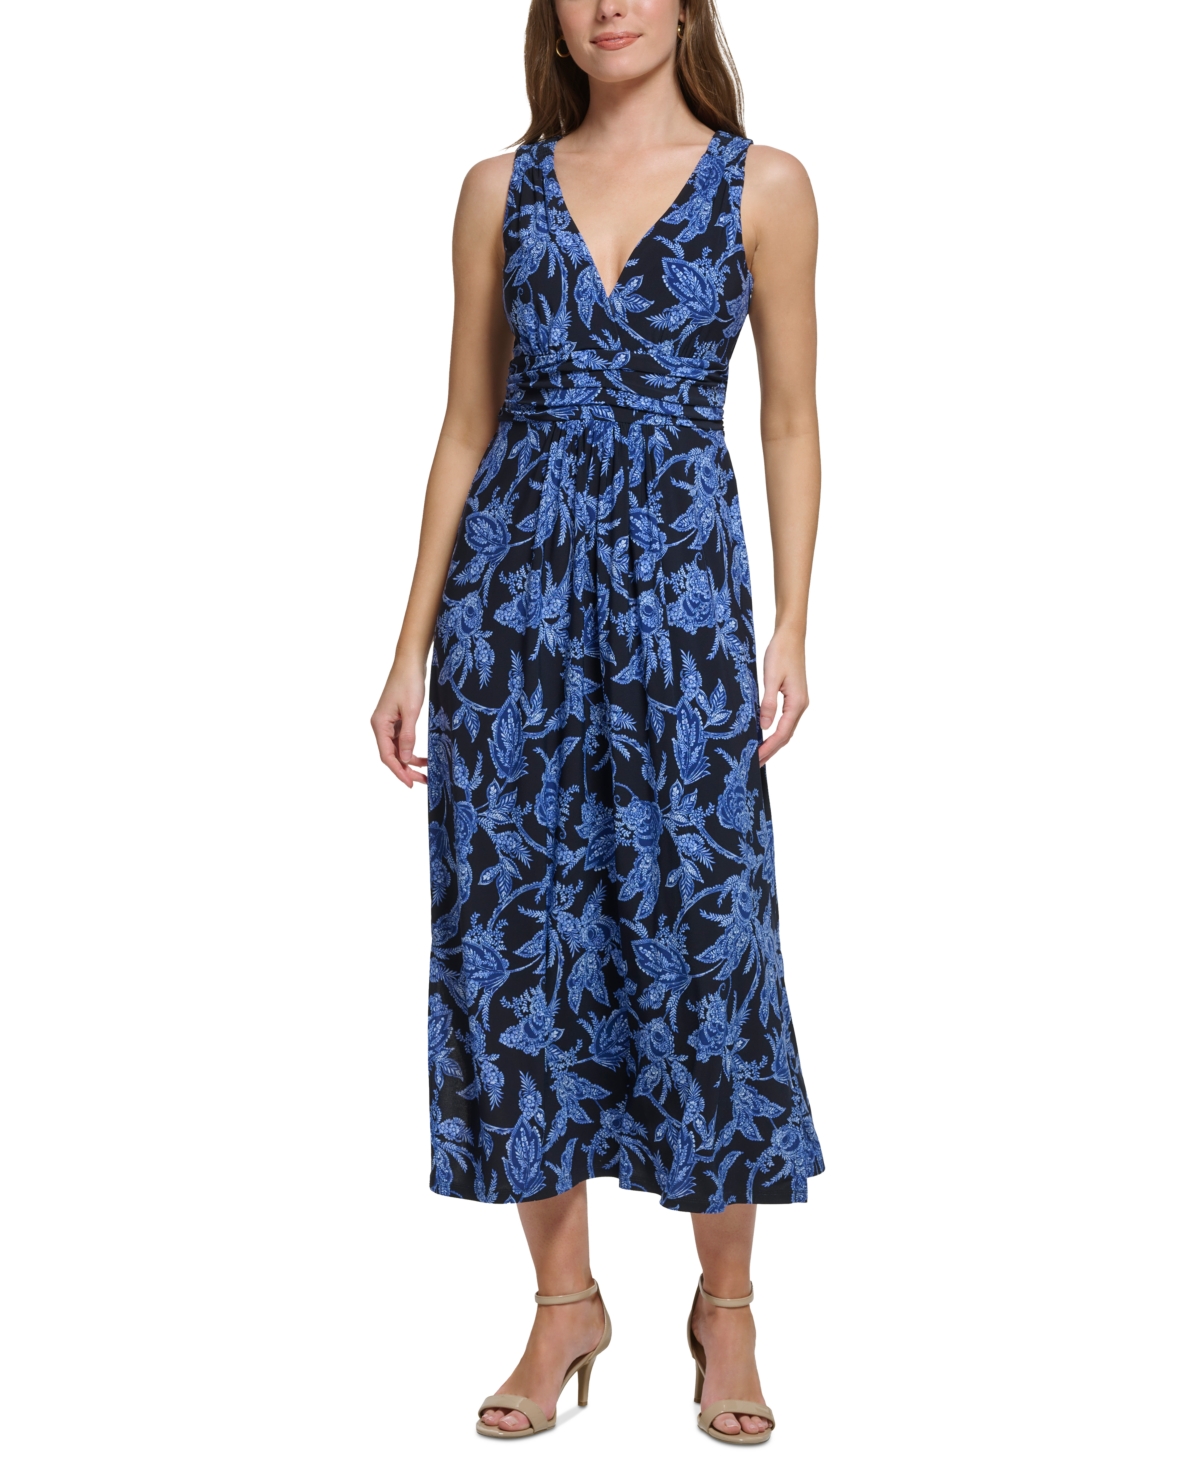 TOMMY HILFIGER WOMEN'S FEATHERED FLORAL PRINTED V-NECK MAXI DRESS